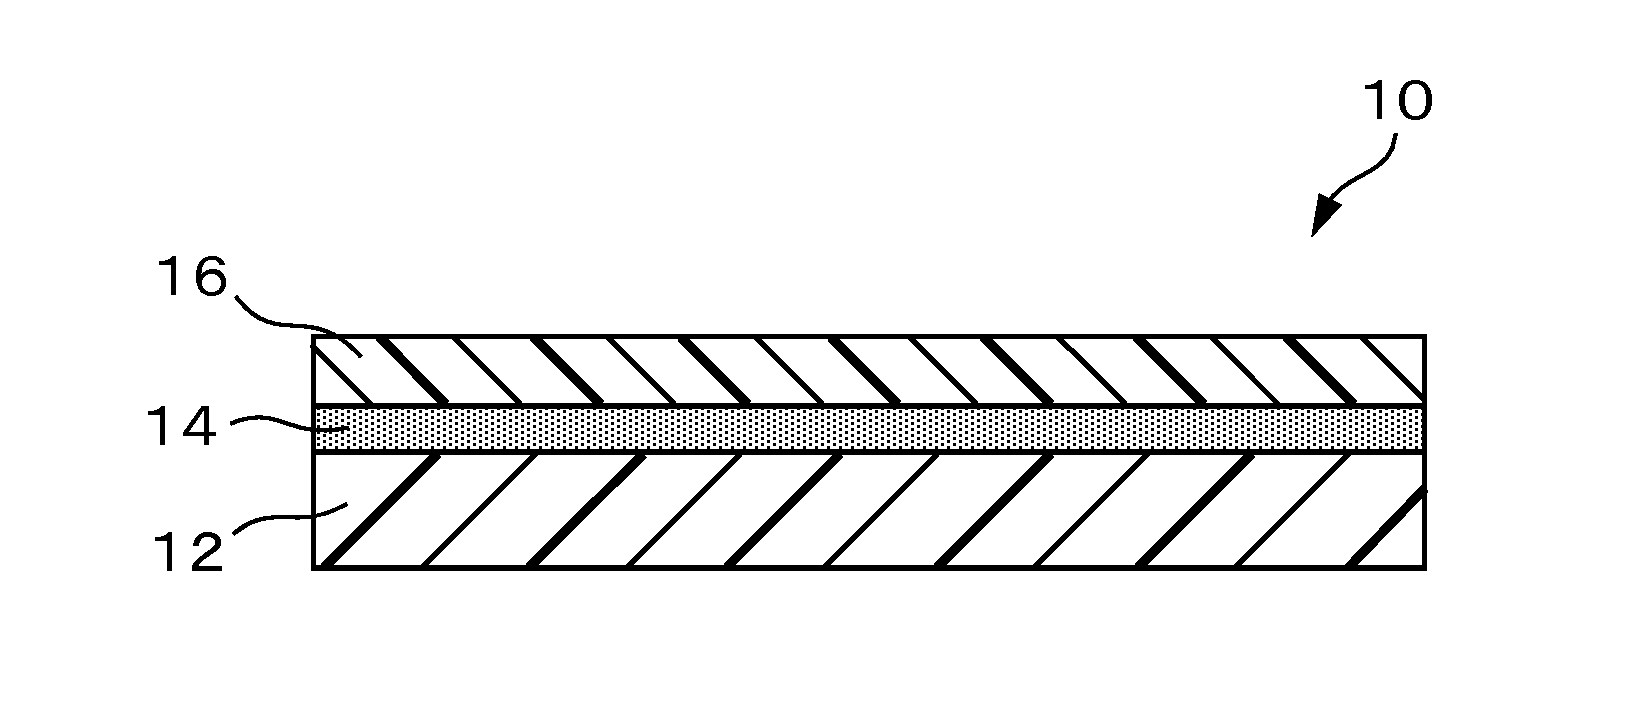 Dual-pack adhesive and structural piece containing same